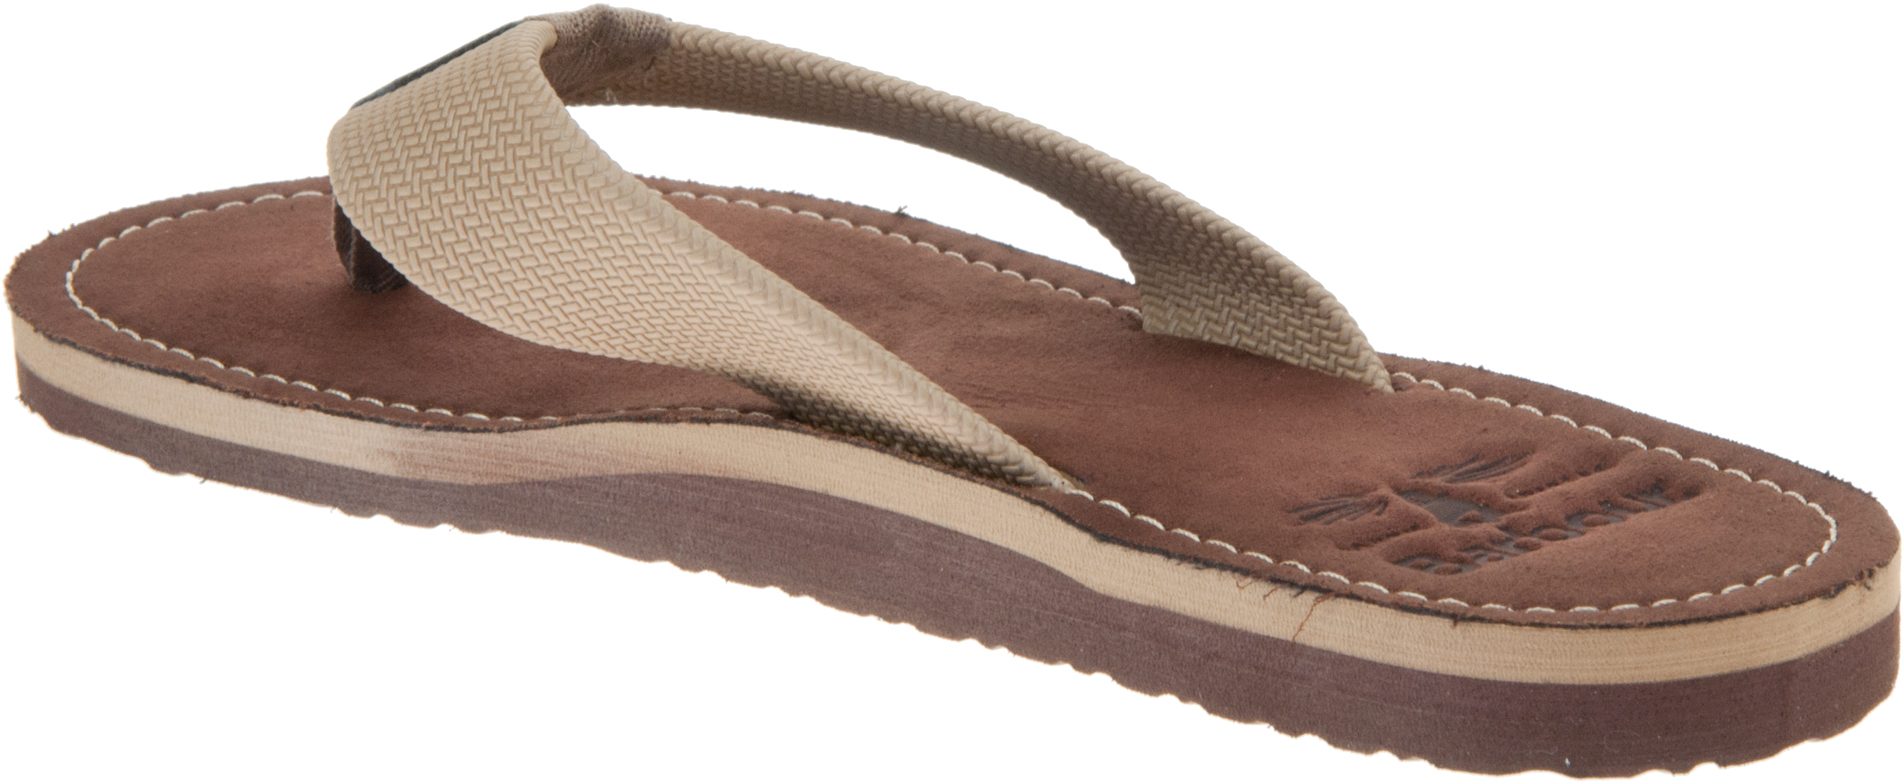 Barbour Toeman Sandal Sand MBS0007BE92 - Toe Post Sandals - Humphries Shoes